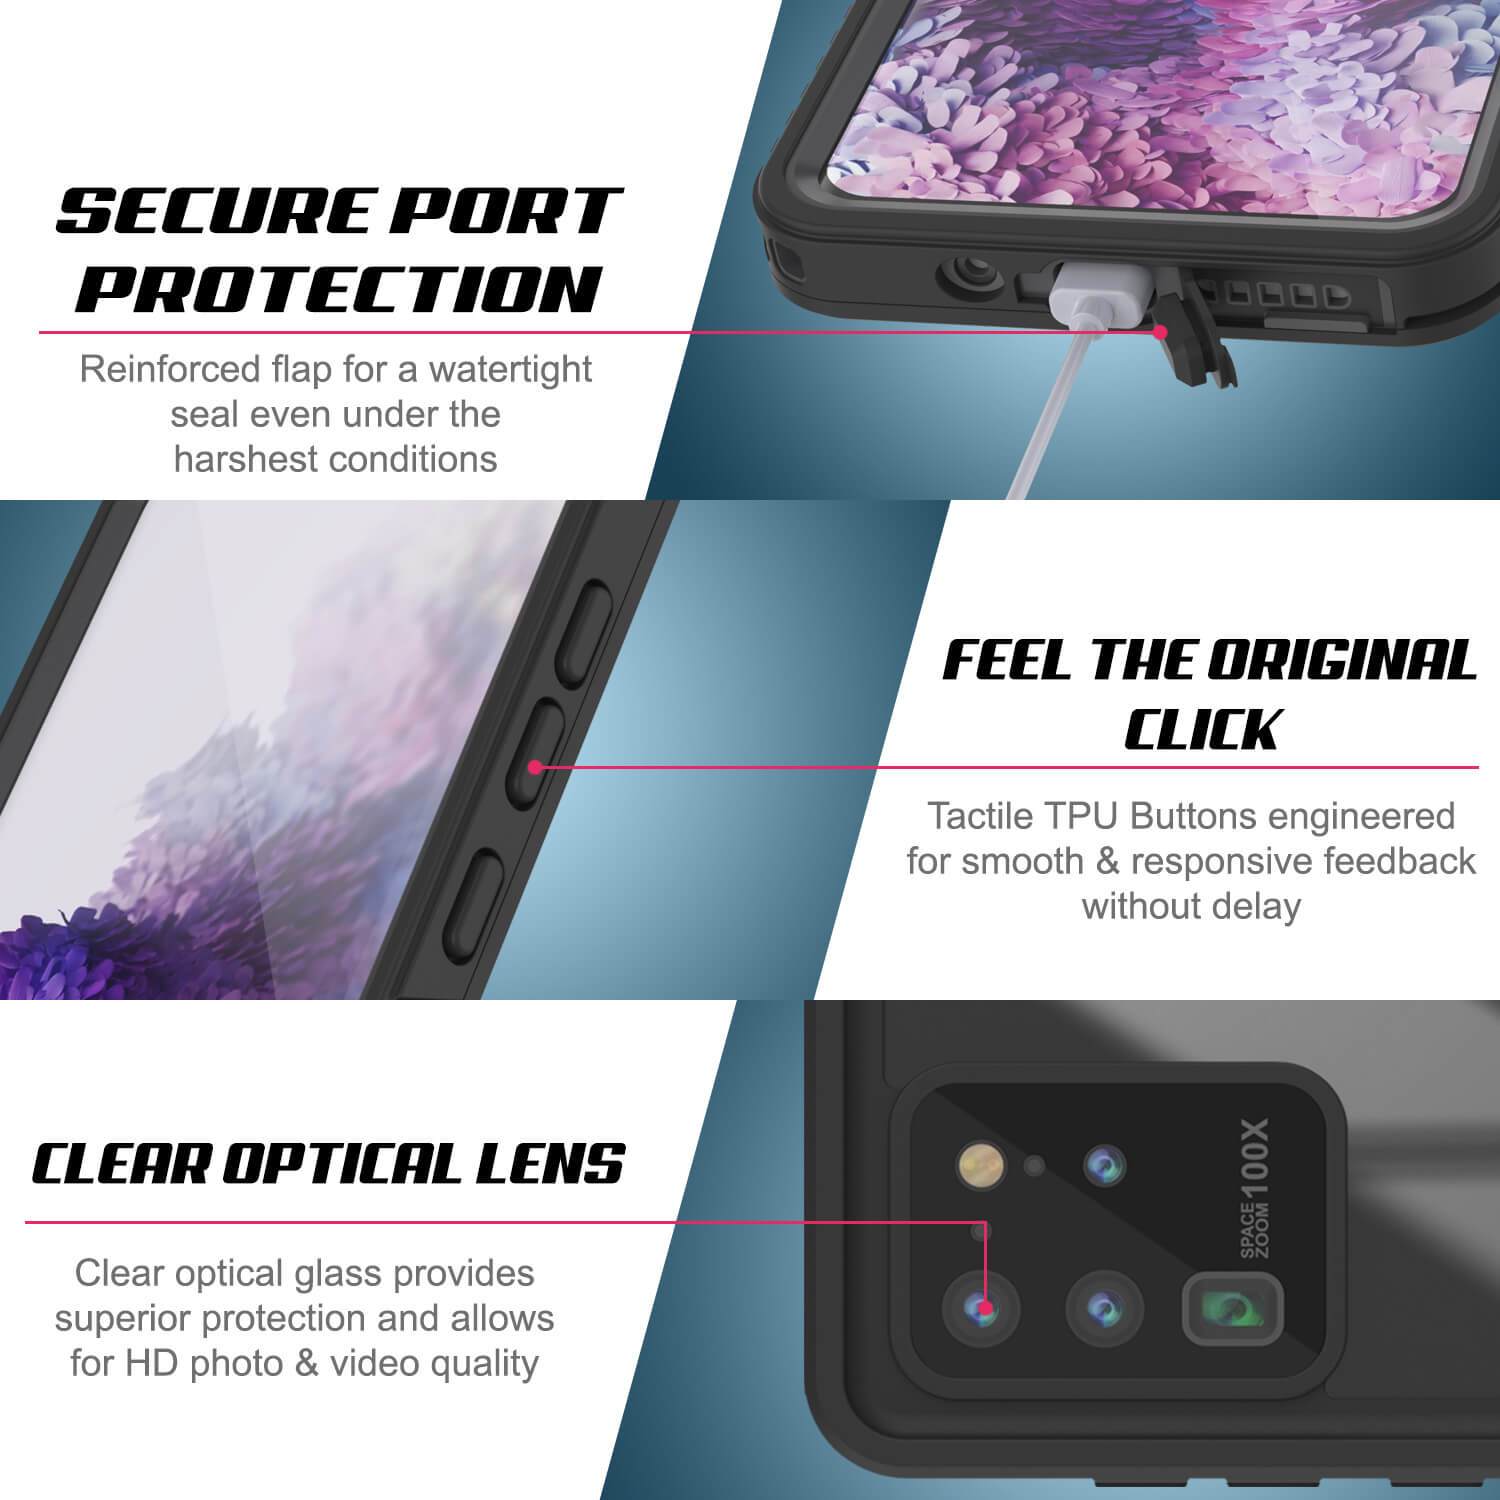 Galaxy S20 Ultra Water/Shockproof [Extreme Series] Slim Screen Protector Case [Purple]